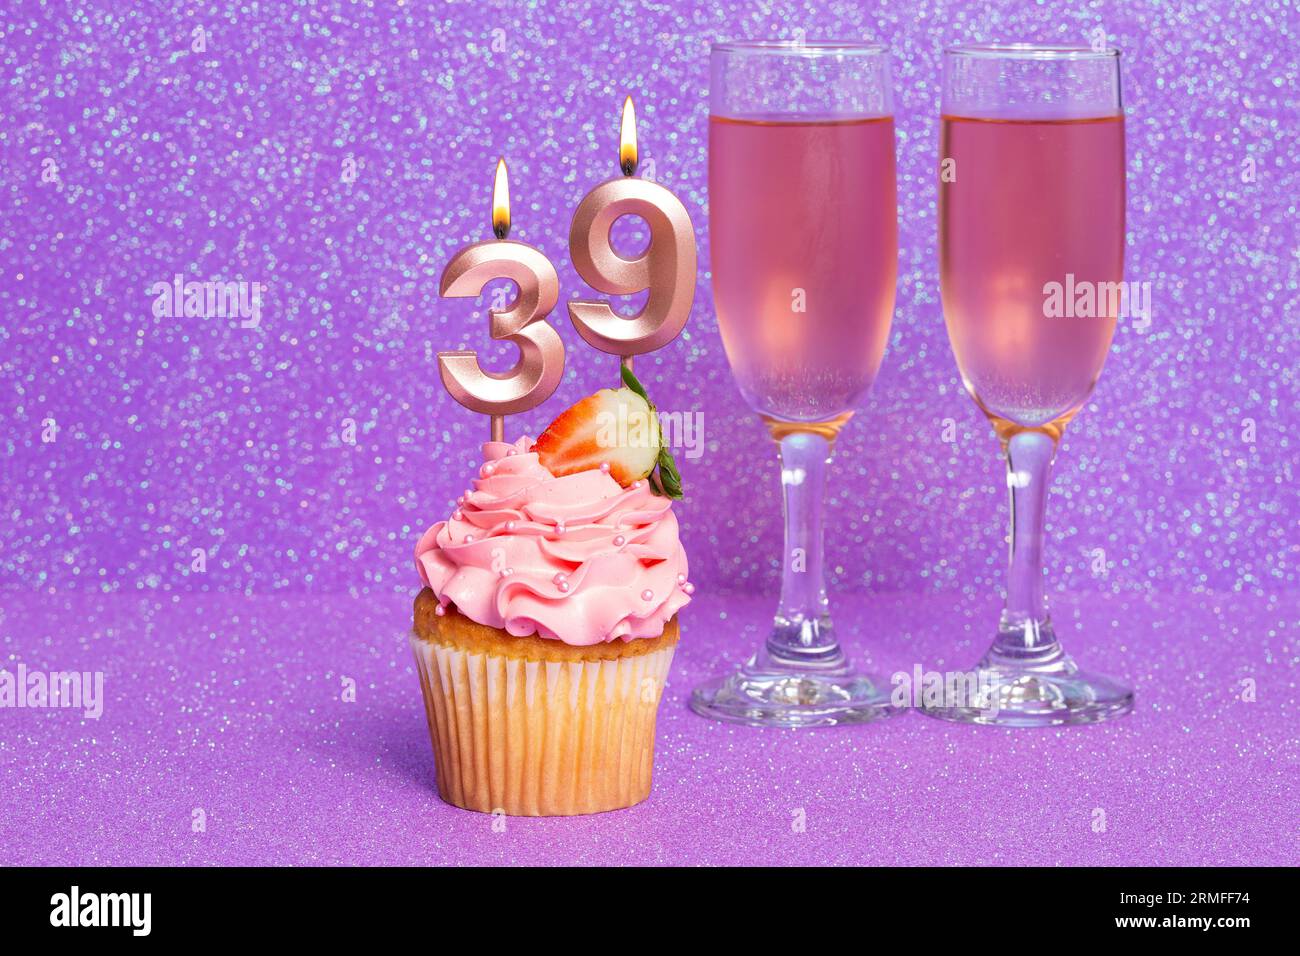 Cupcake With Number And Glasses With Wine For Birthday Or Anniversary Celebration; Number Thirty Nine. Stock Photo